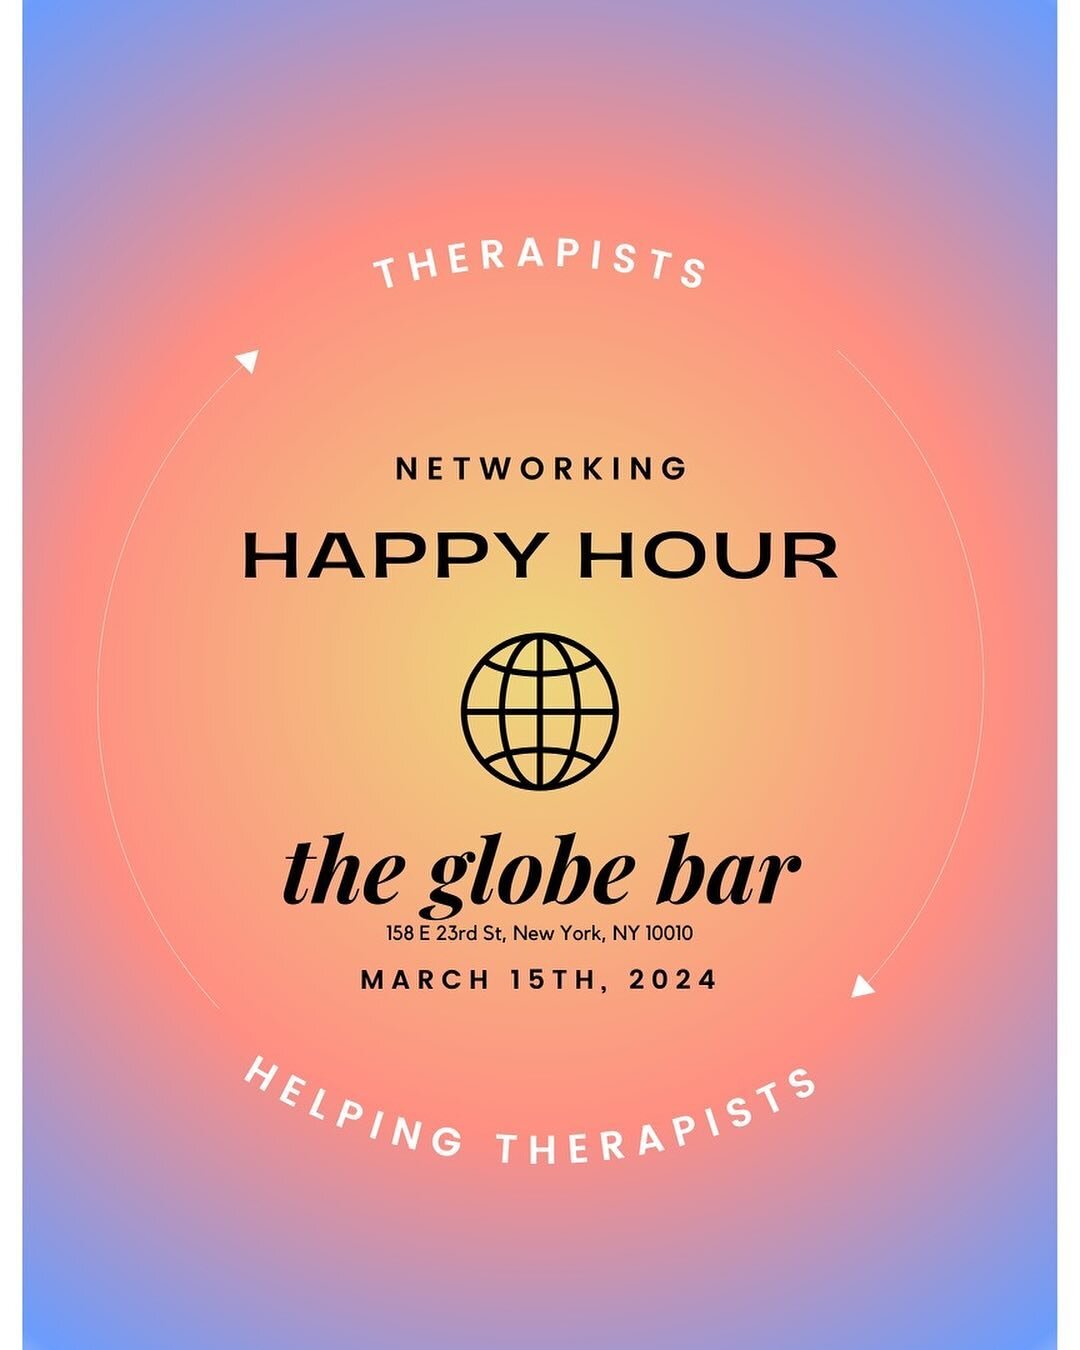 NYC Therapists: Join us for a networking happy hour at The Globe Bar from 6:00-9:00 on Friday, March 15th.

Please share with other colleagues and we look forward to seeing you there! #nyctherapist #nyctherapy